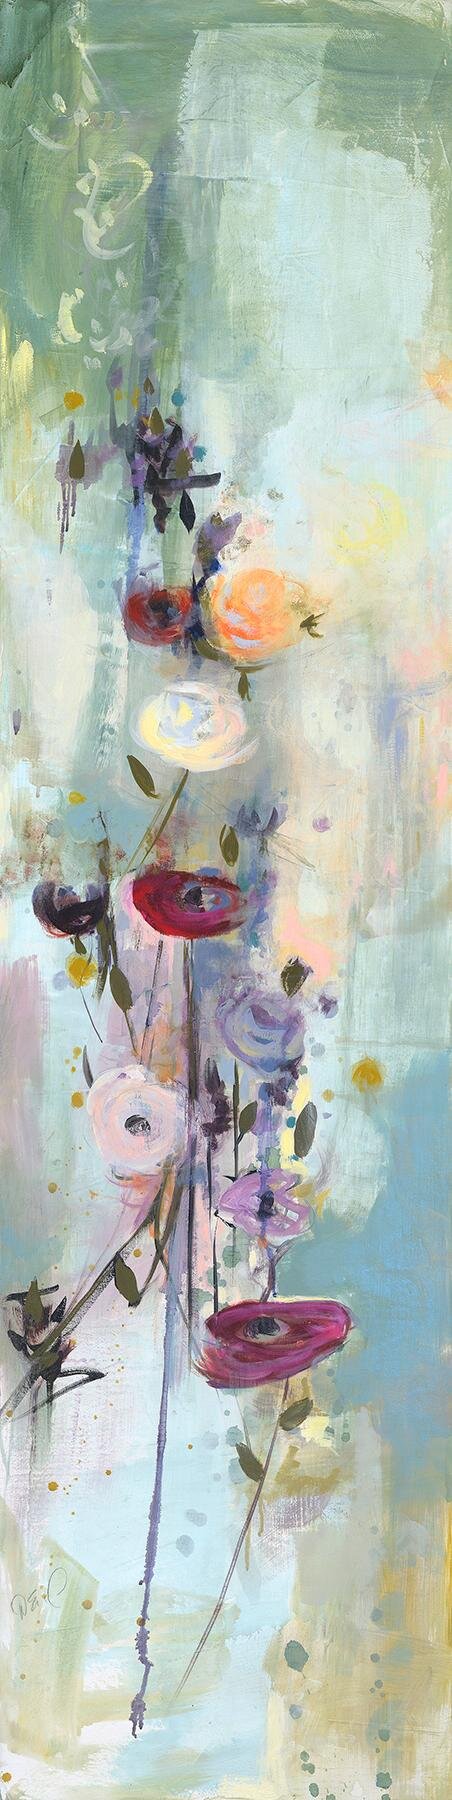   Blossom II  Oil on wood 48x12 inches SOLD 